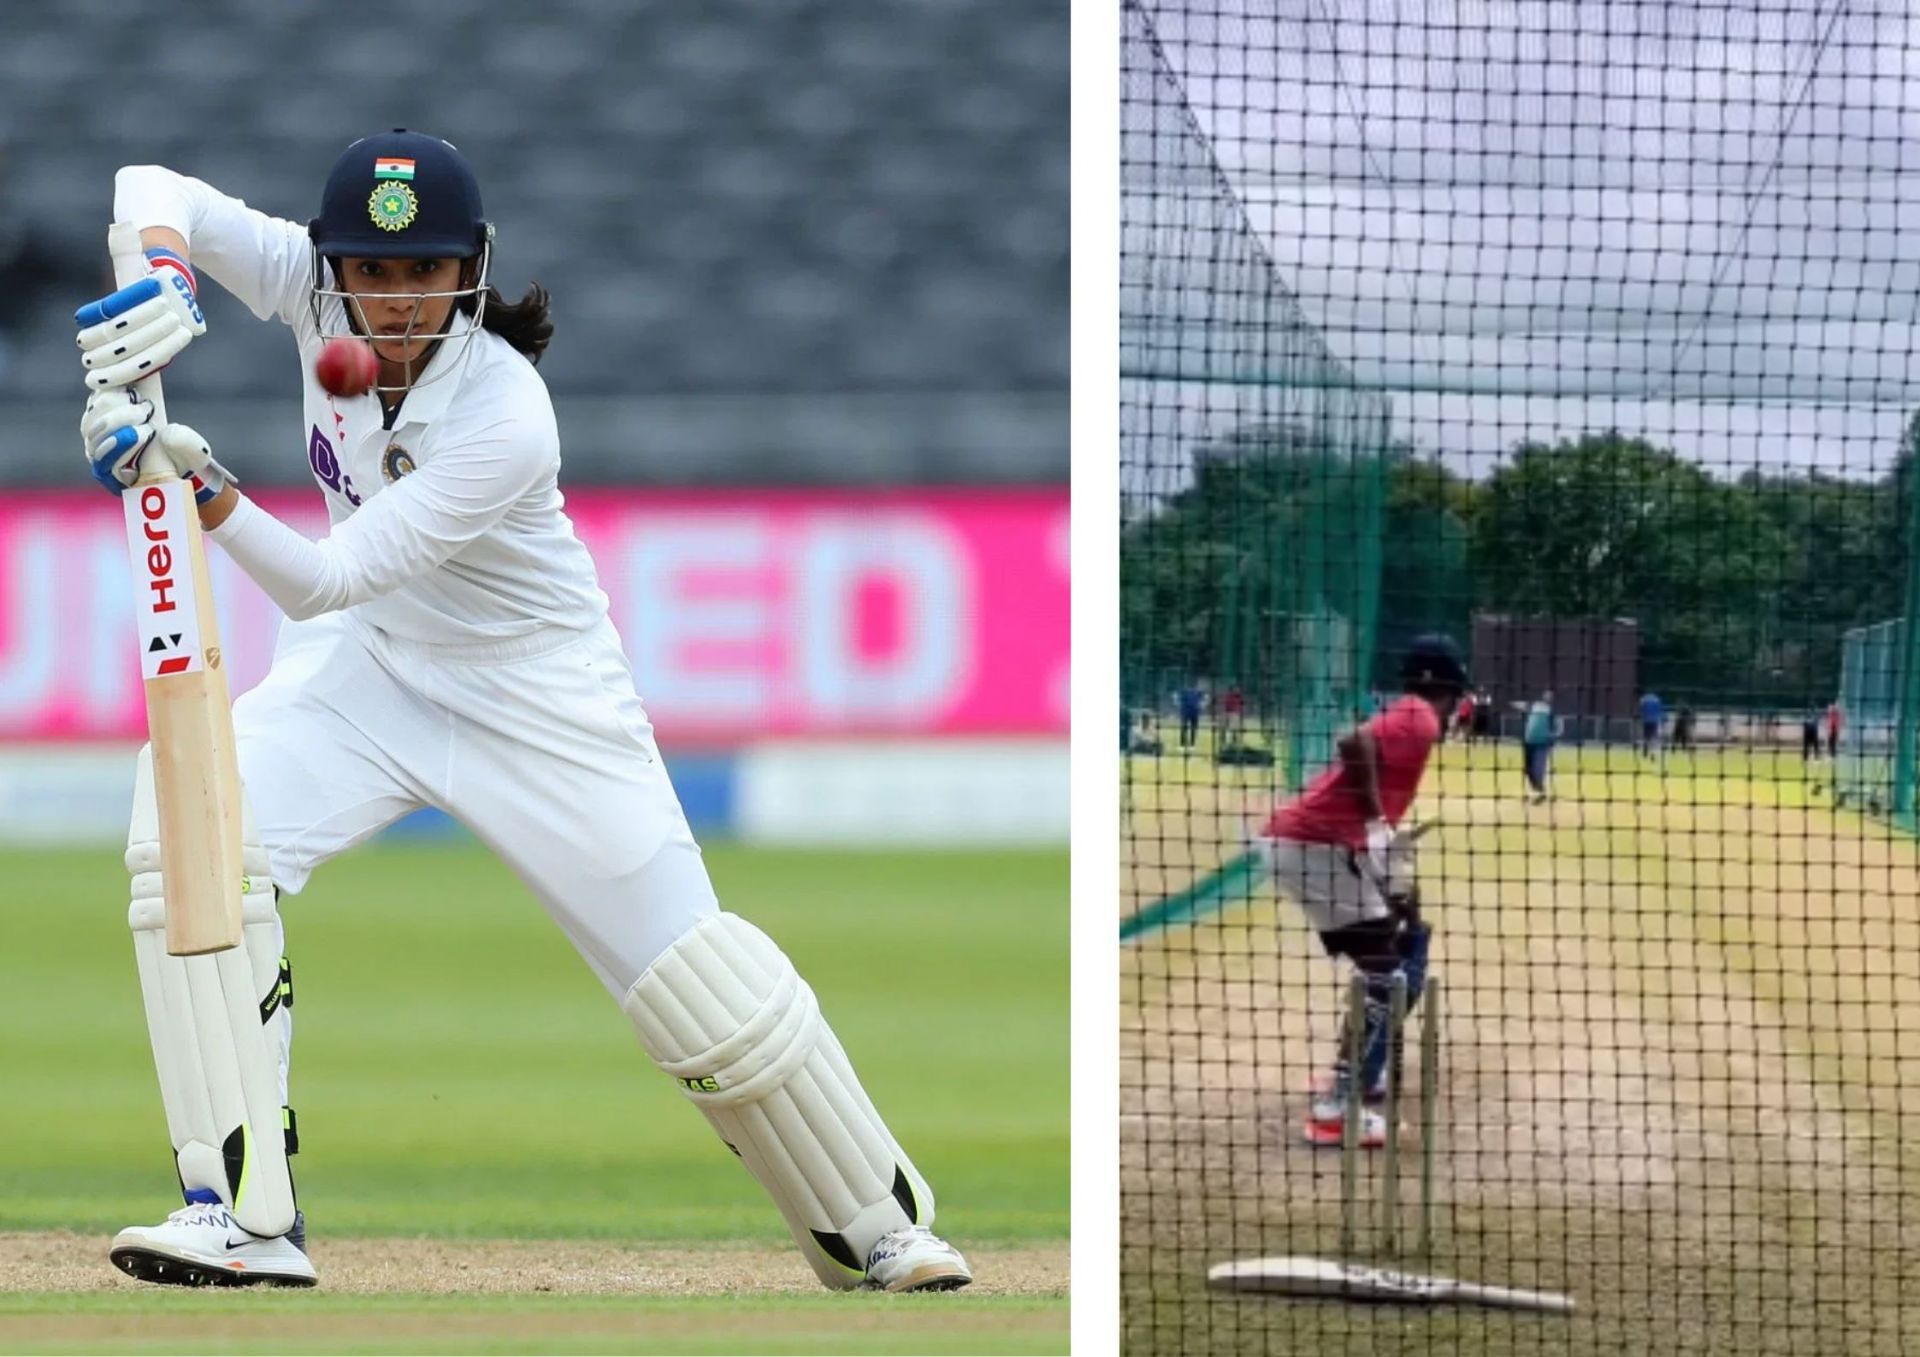 Smriti Mandhana and Jhulan Goswami are household names in world cricket. (Picture Credits: Getty Images; Screengrab via YouTube).